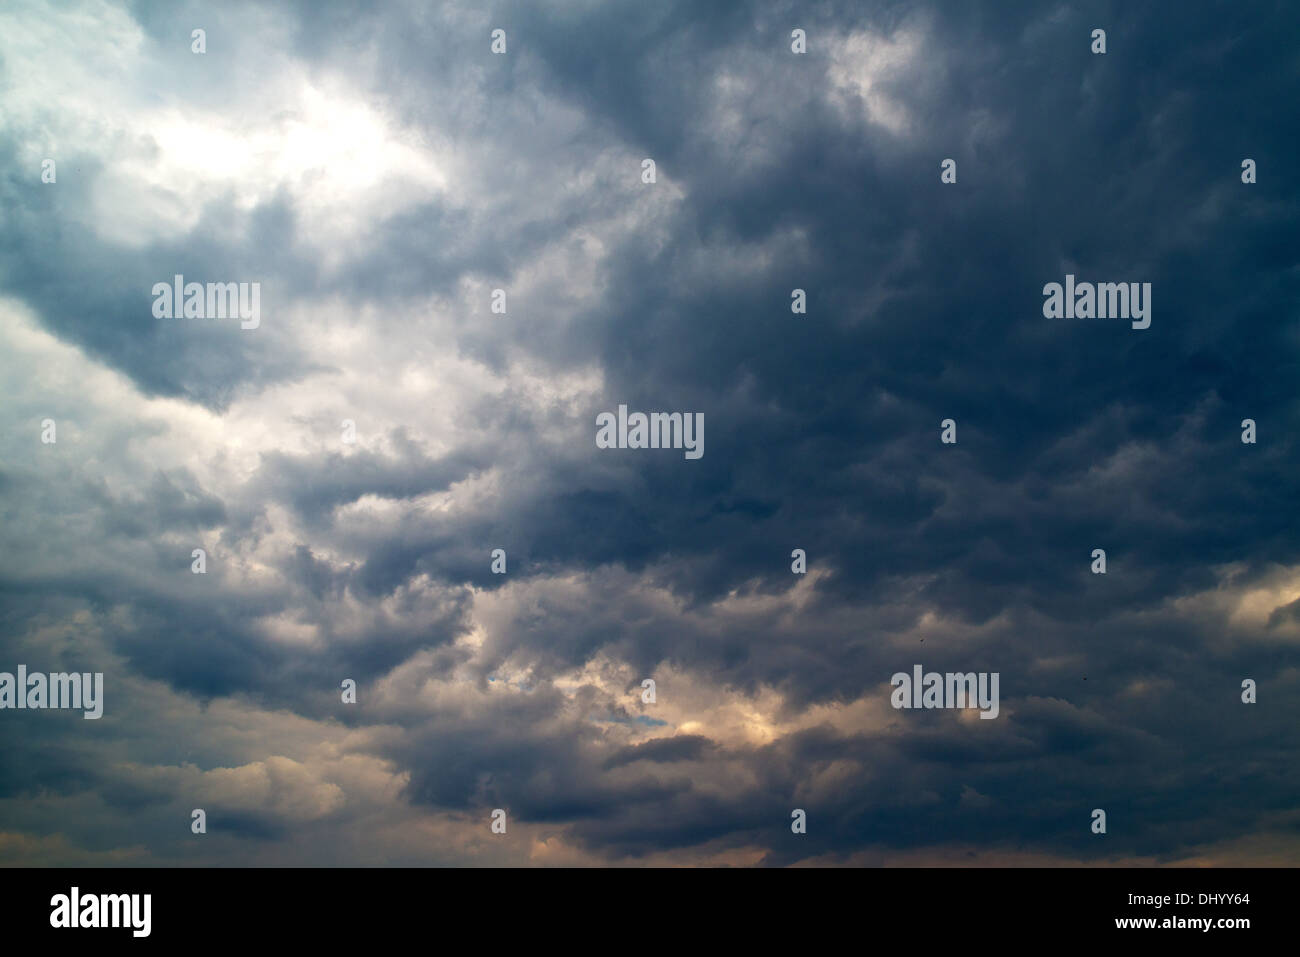 Heavy gray storm clouds bringing the cold winter rain Stock Photo